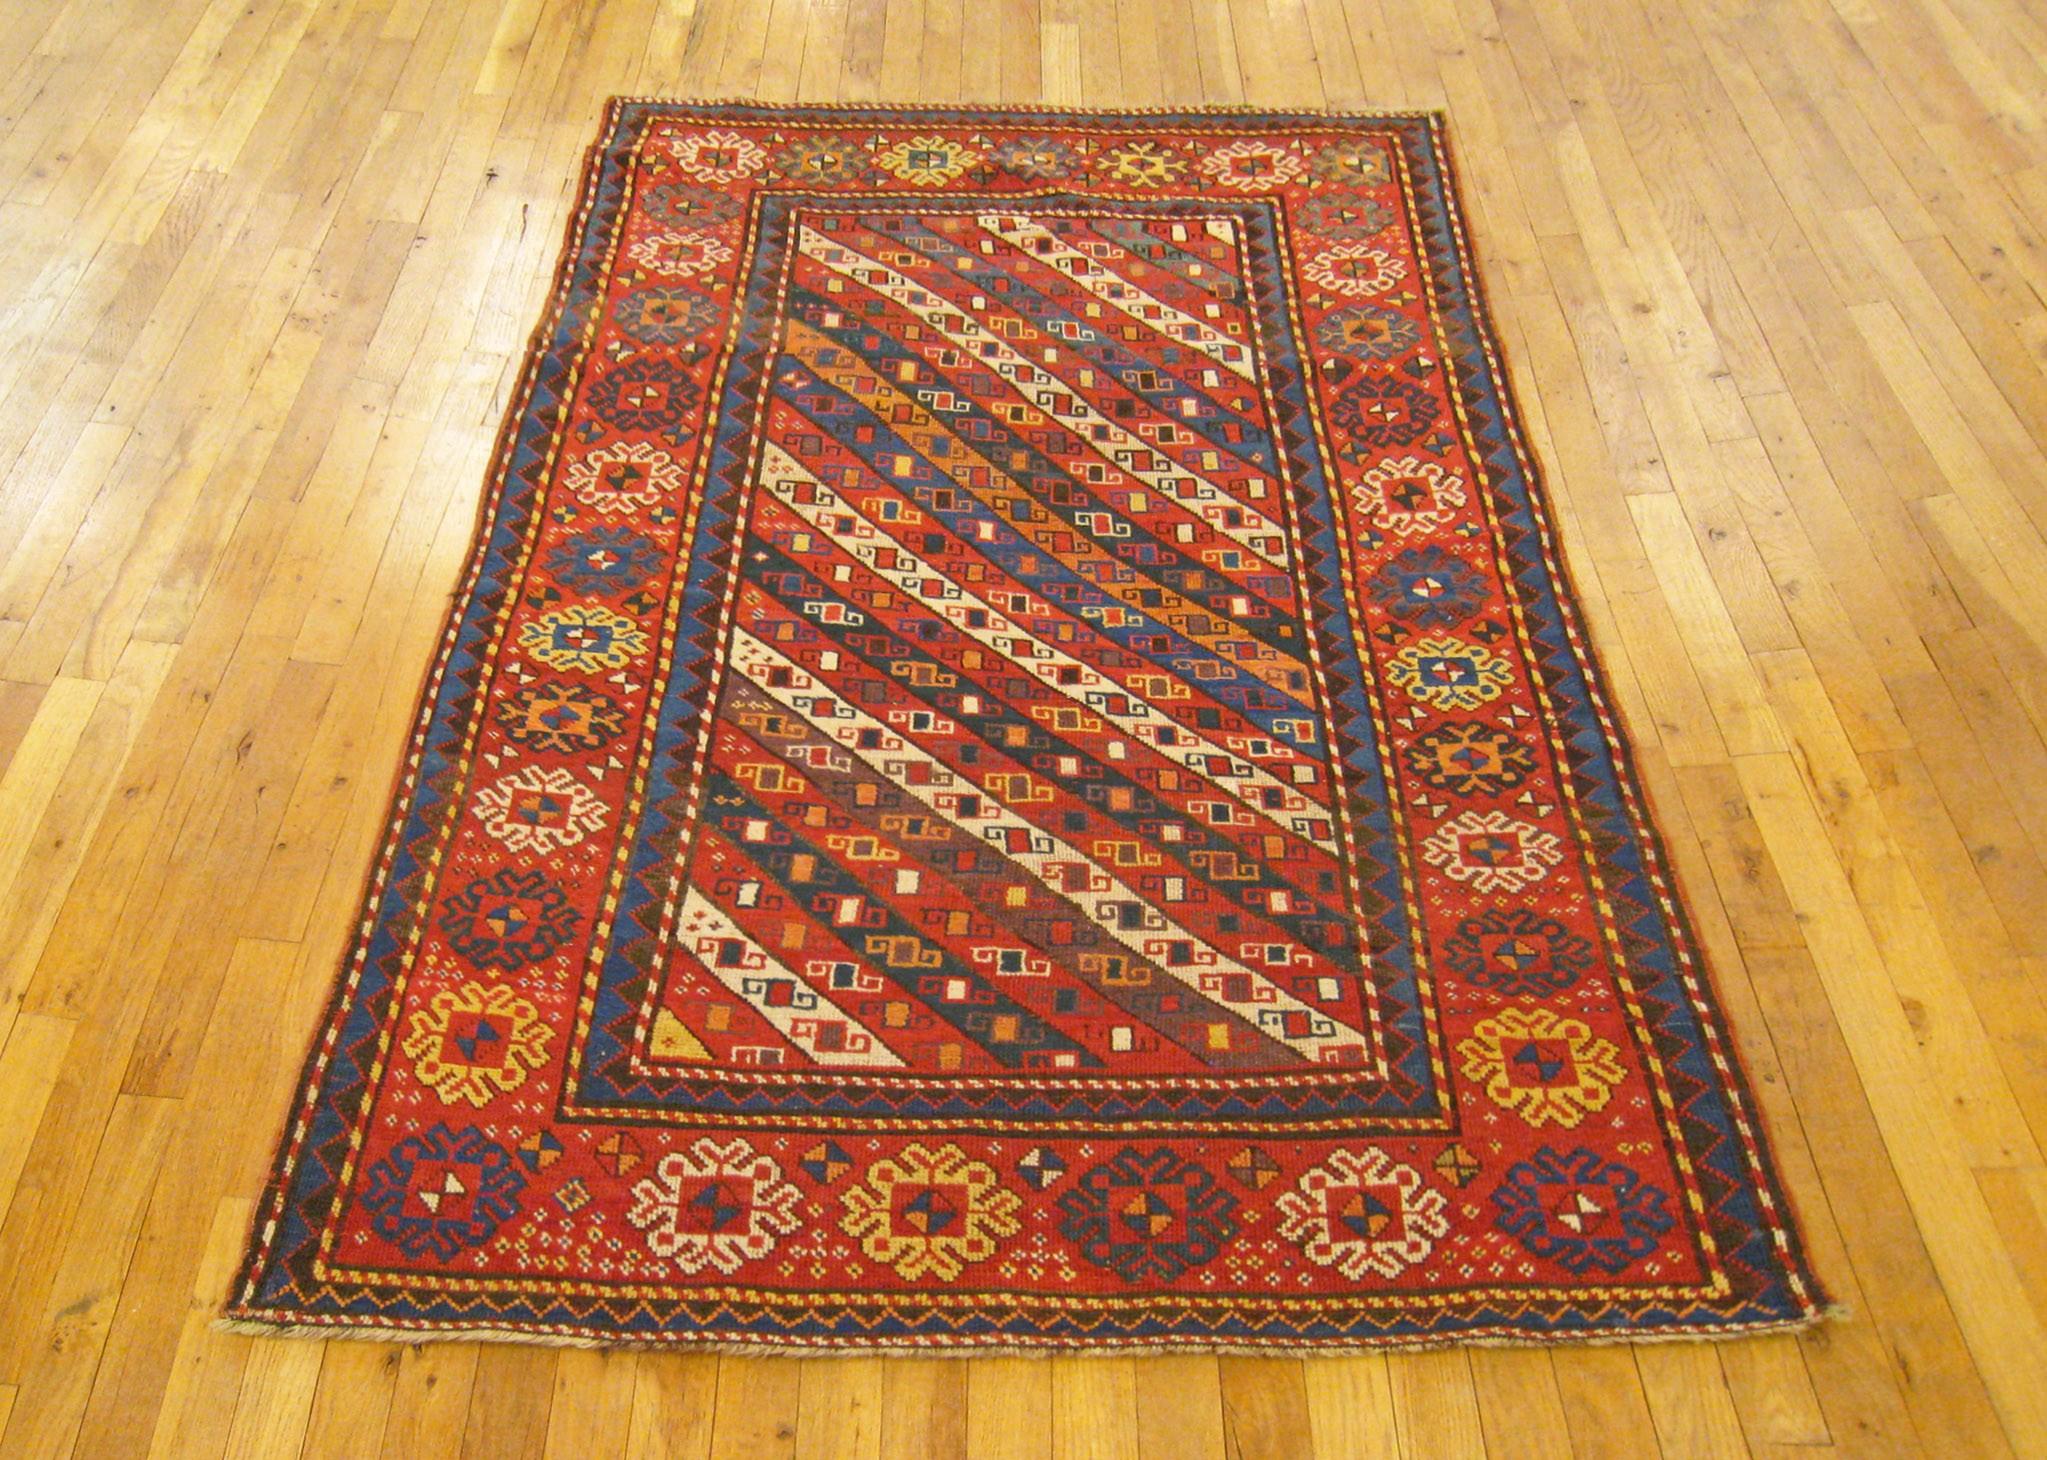 Antique Caucasian Gendje rug, runner size, circa 1890.

A one-of-a-kind antique Caucasian Gendje oriental rug, hand-knotted with soft and supple wool pile. This lovely hand-knotted carpet features a serie of diagonal stripes in the primary field,